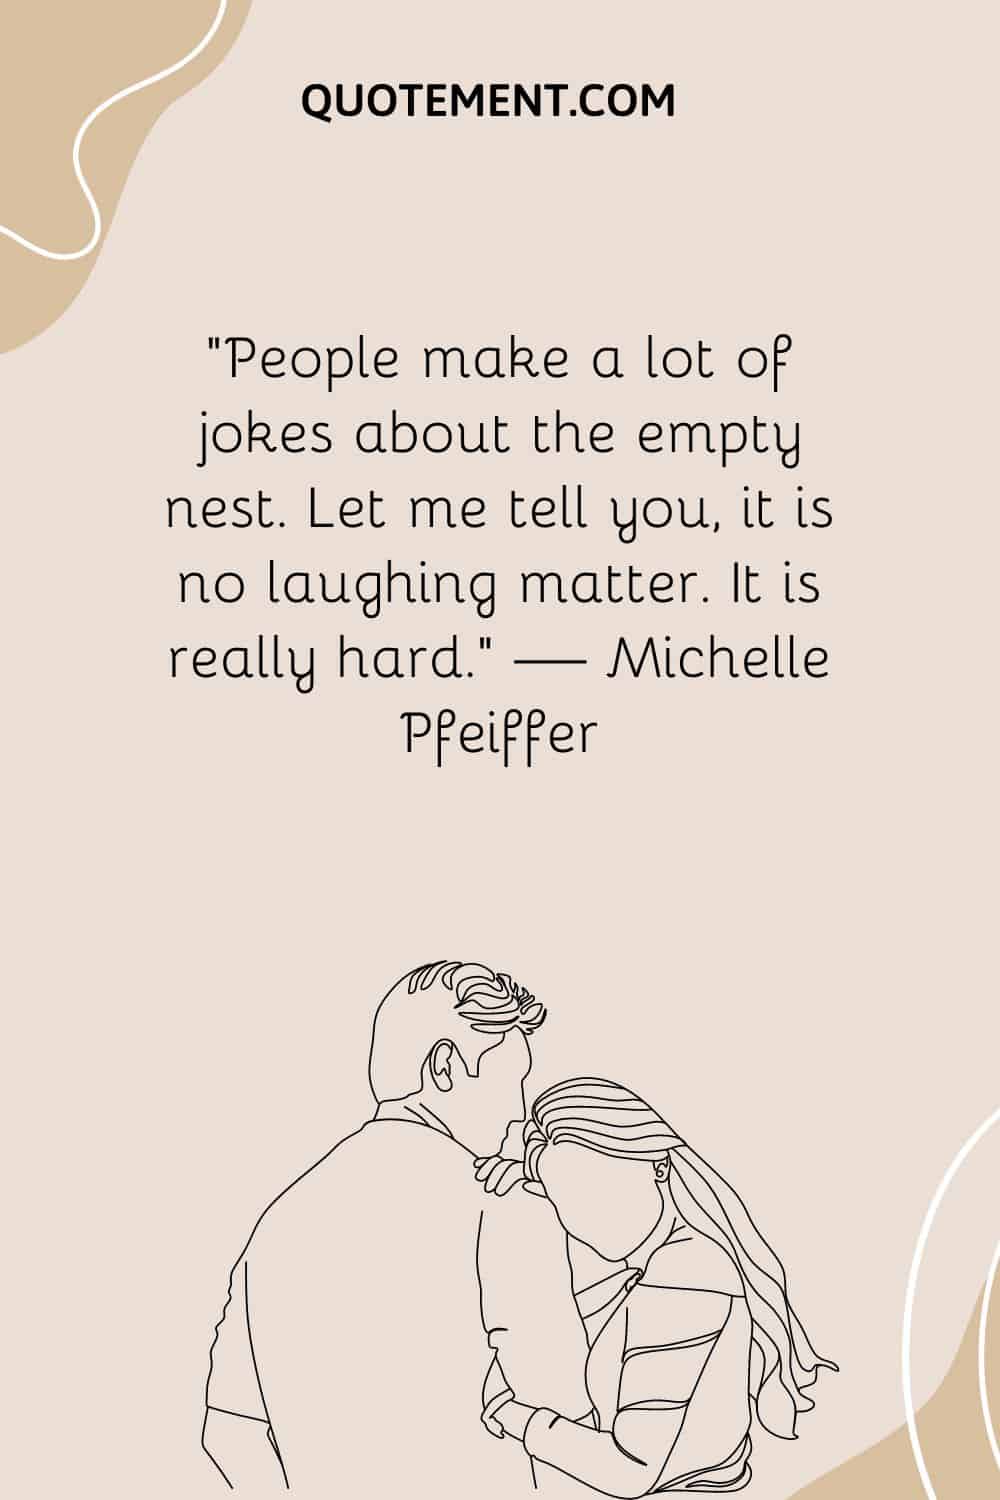 “People make a lot of jokes about the empty nest. Let me tell you, it is no laughing matter. It is really hard.” — Michelle Pfeiffer